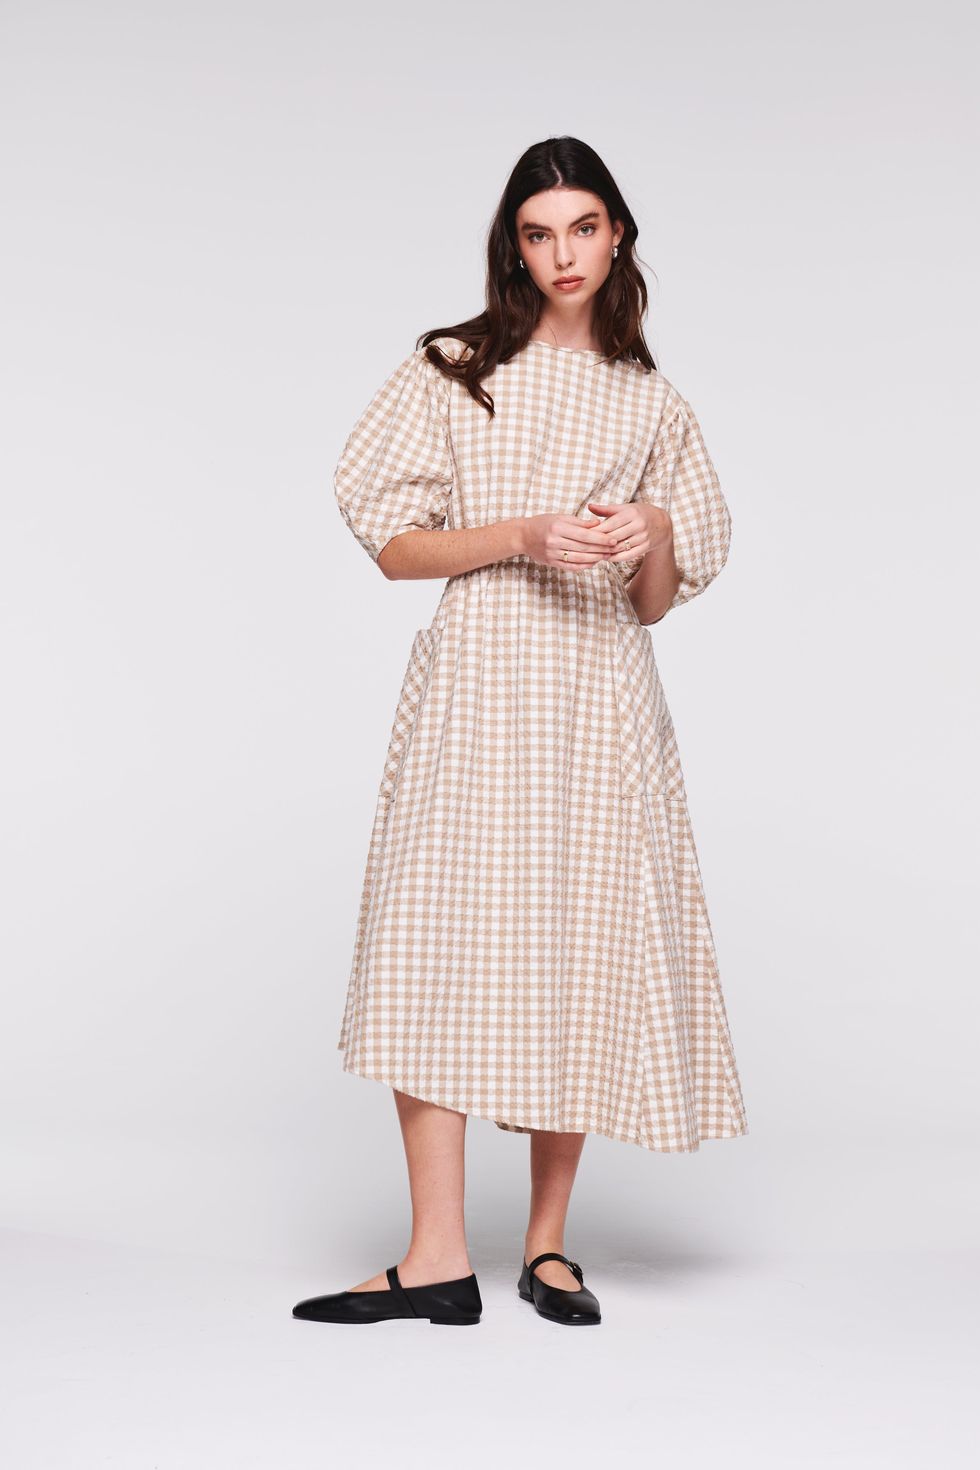 Aligne's sell-out Gabriella dress is back for spring/summer